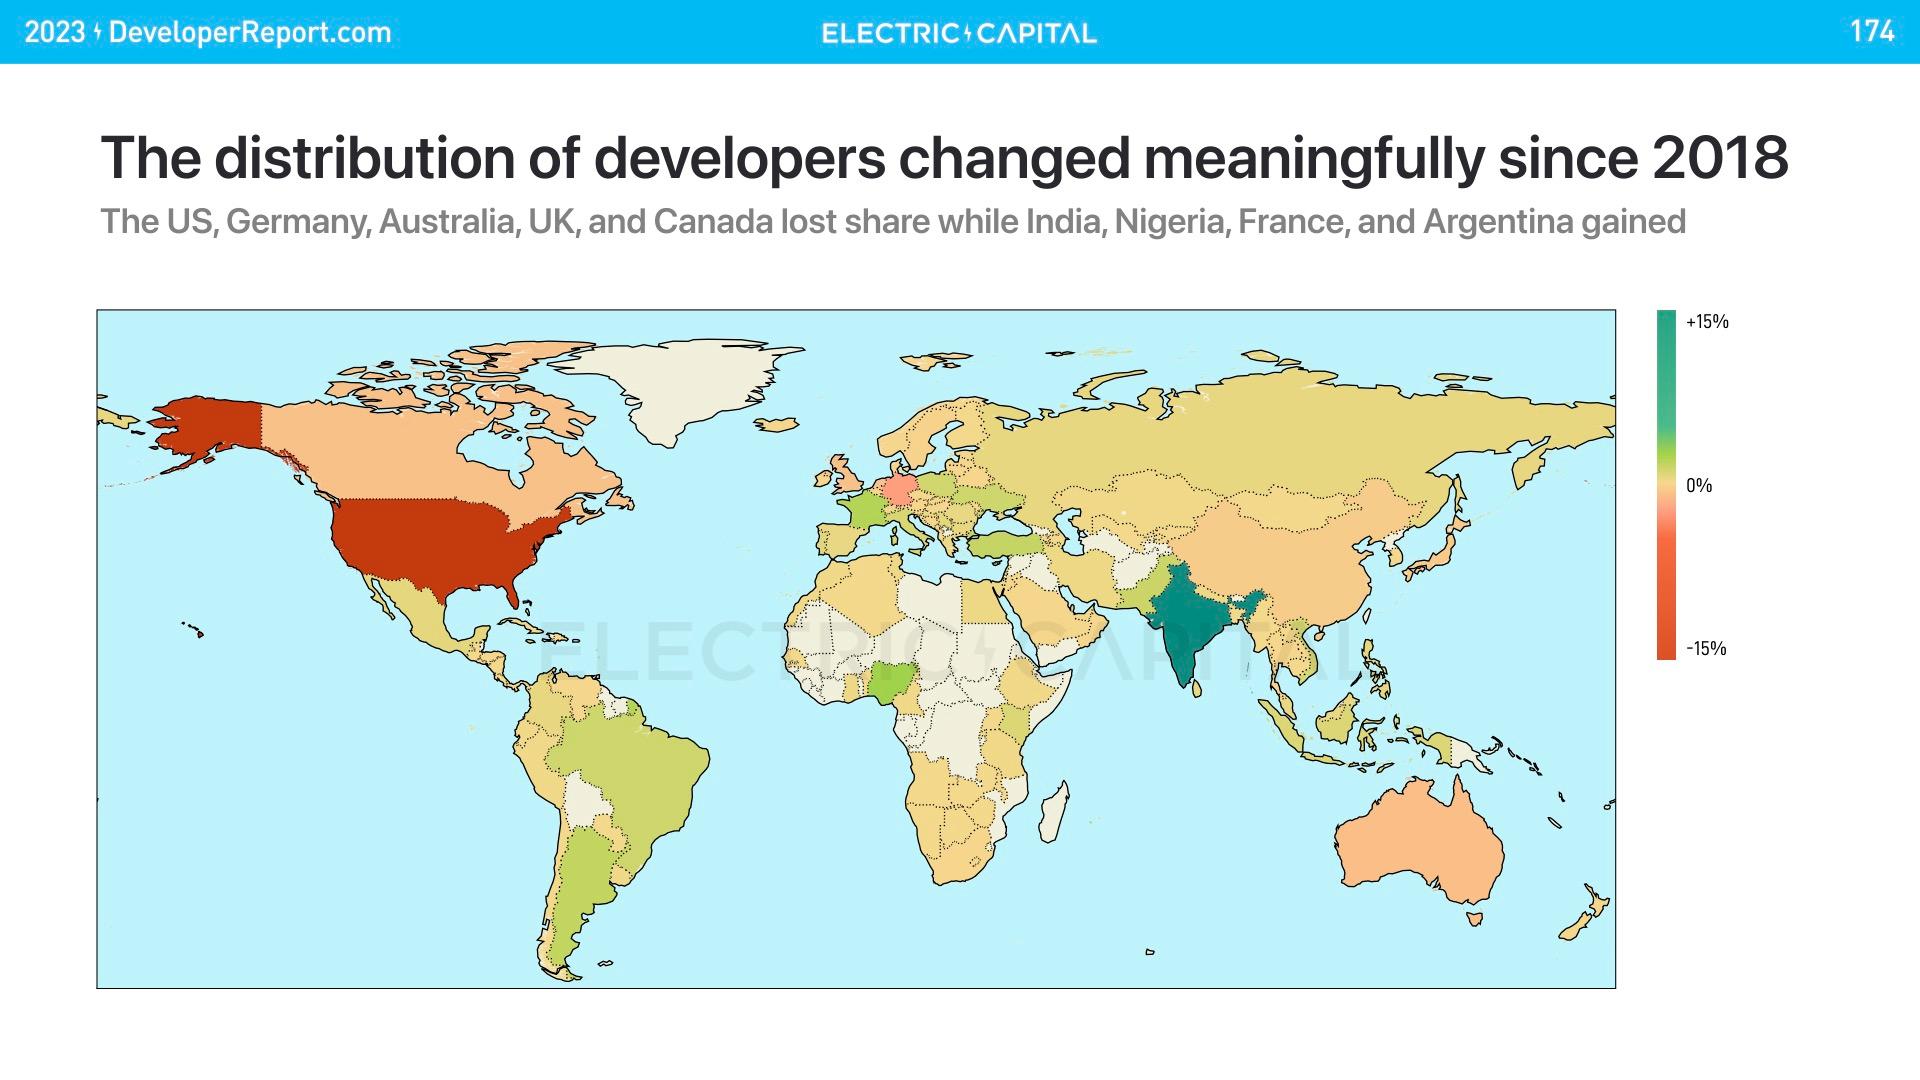 74% of crypto developers live outside of the US